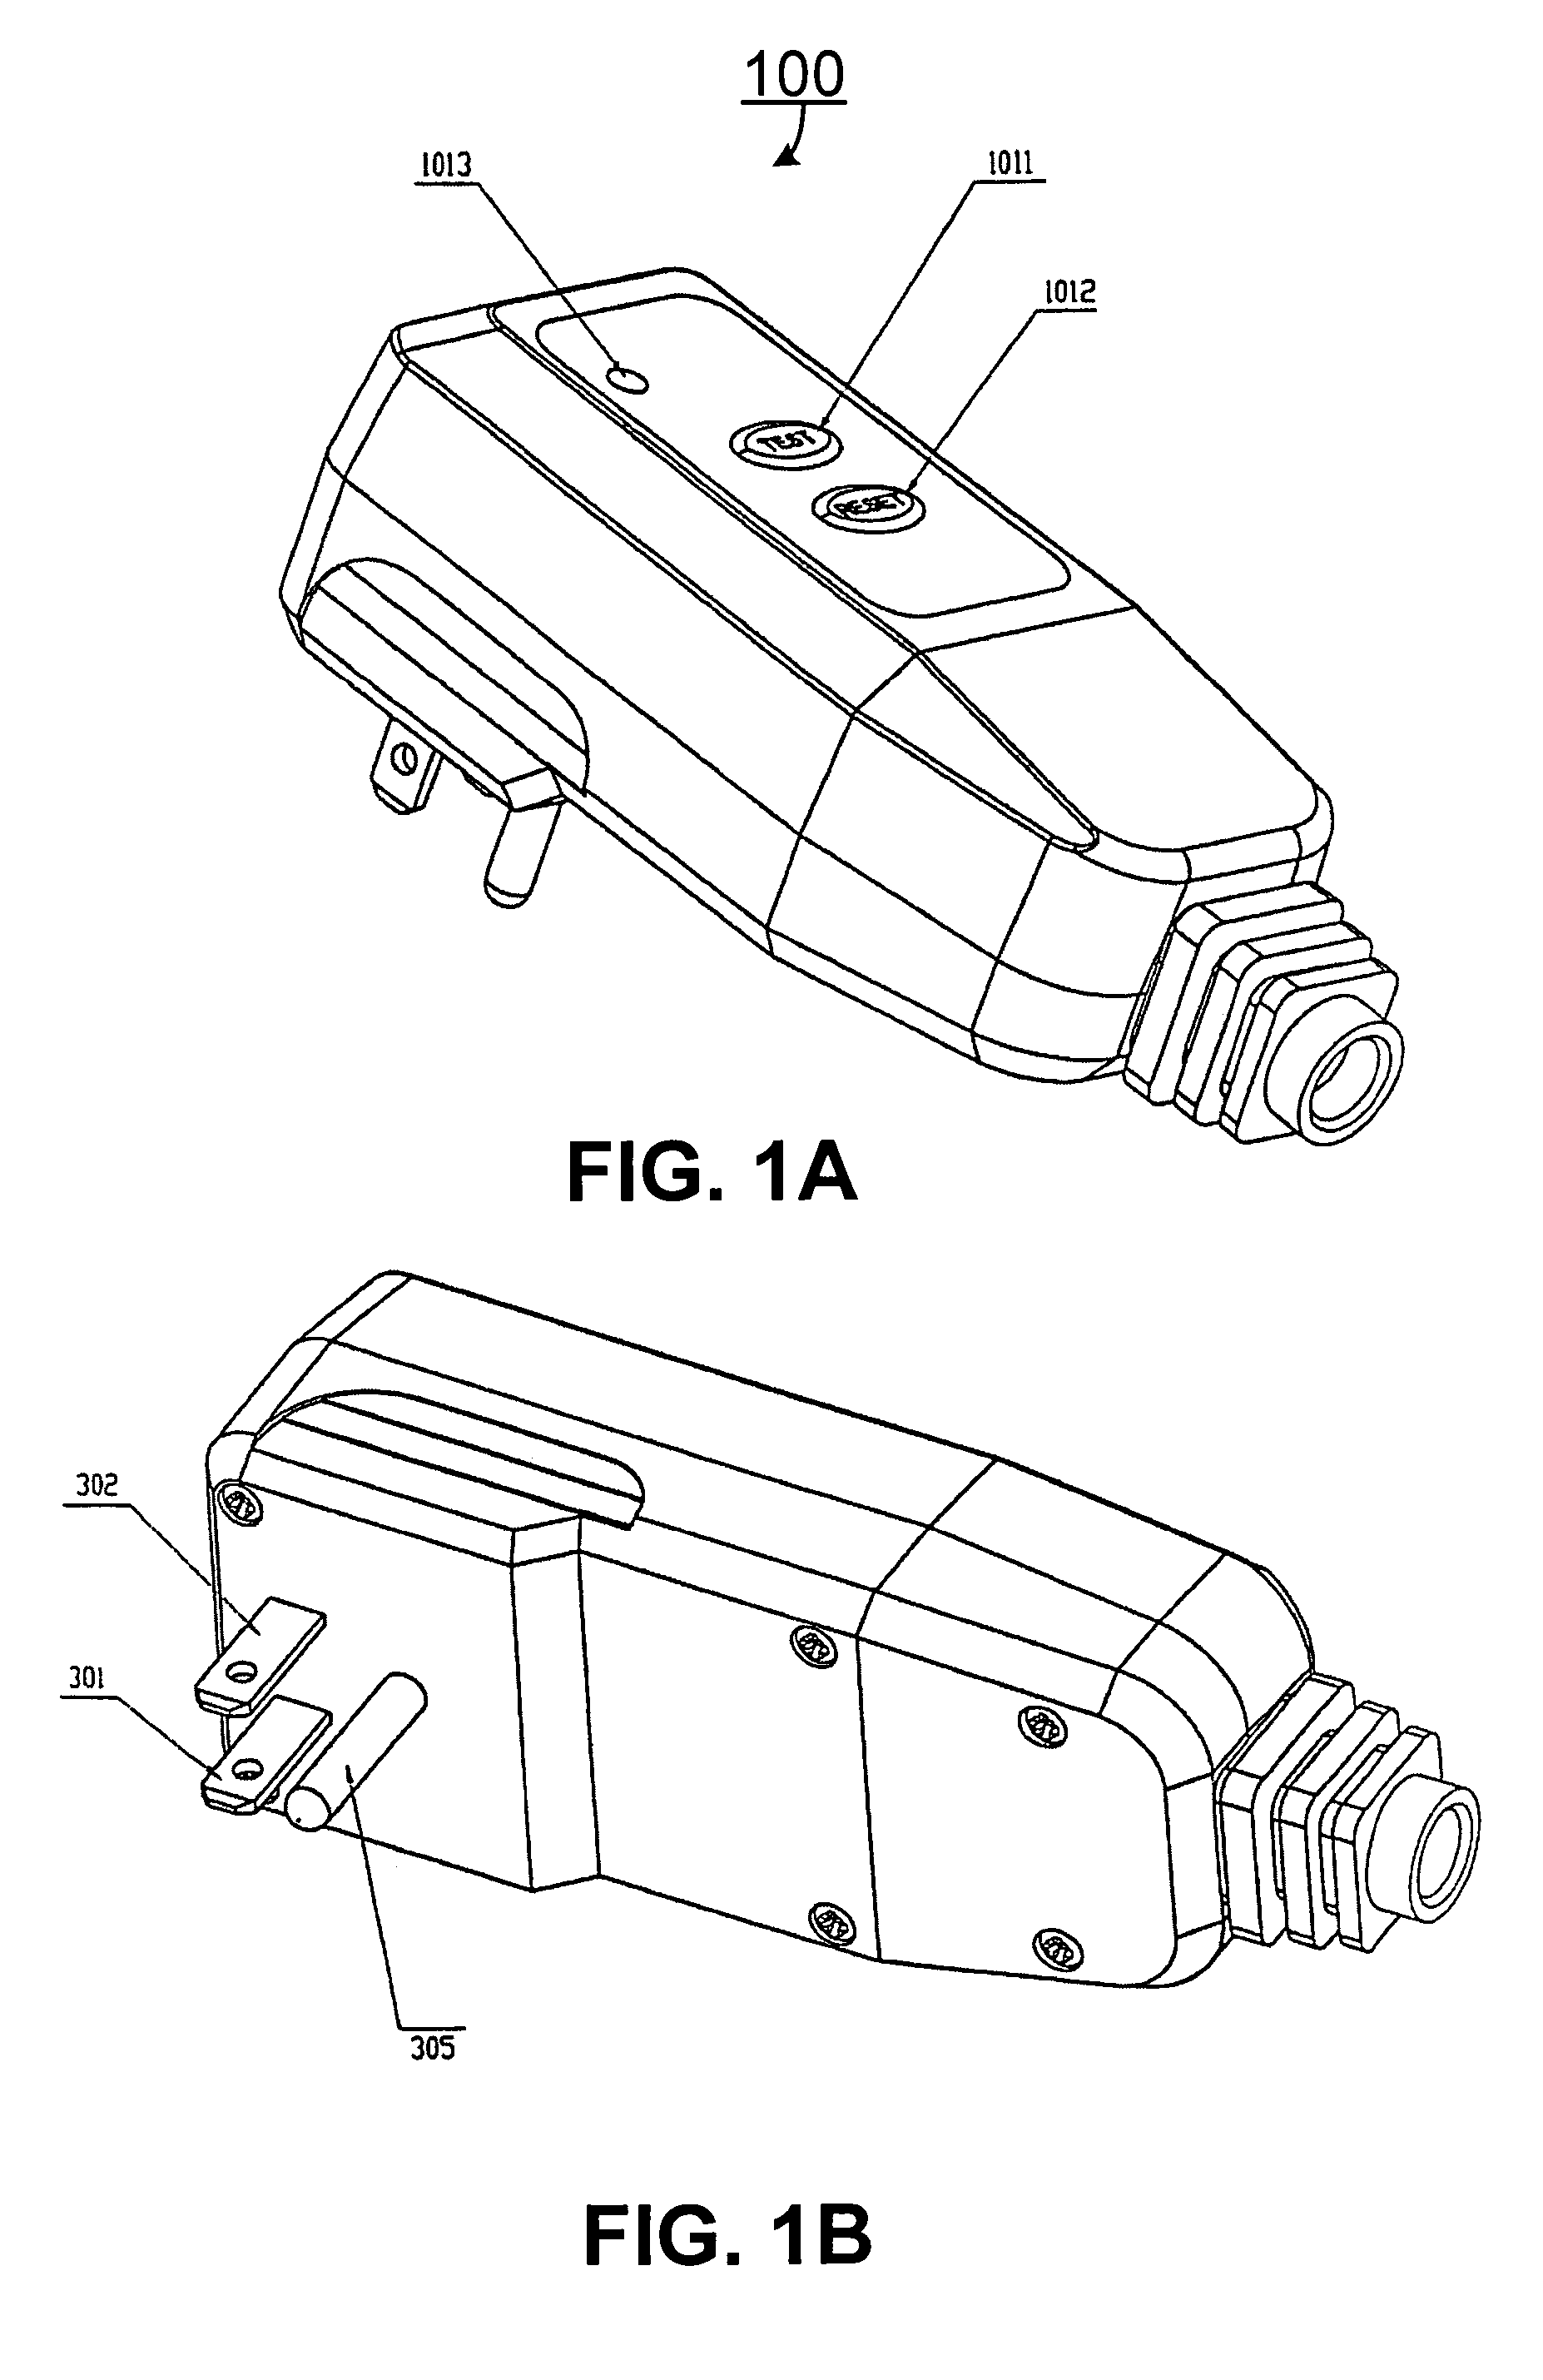 Permanent-magnet ground fault circuit interrupter plug and its permanent-magnet mechanism therein